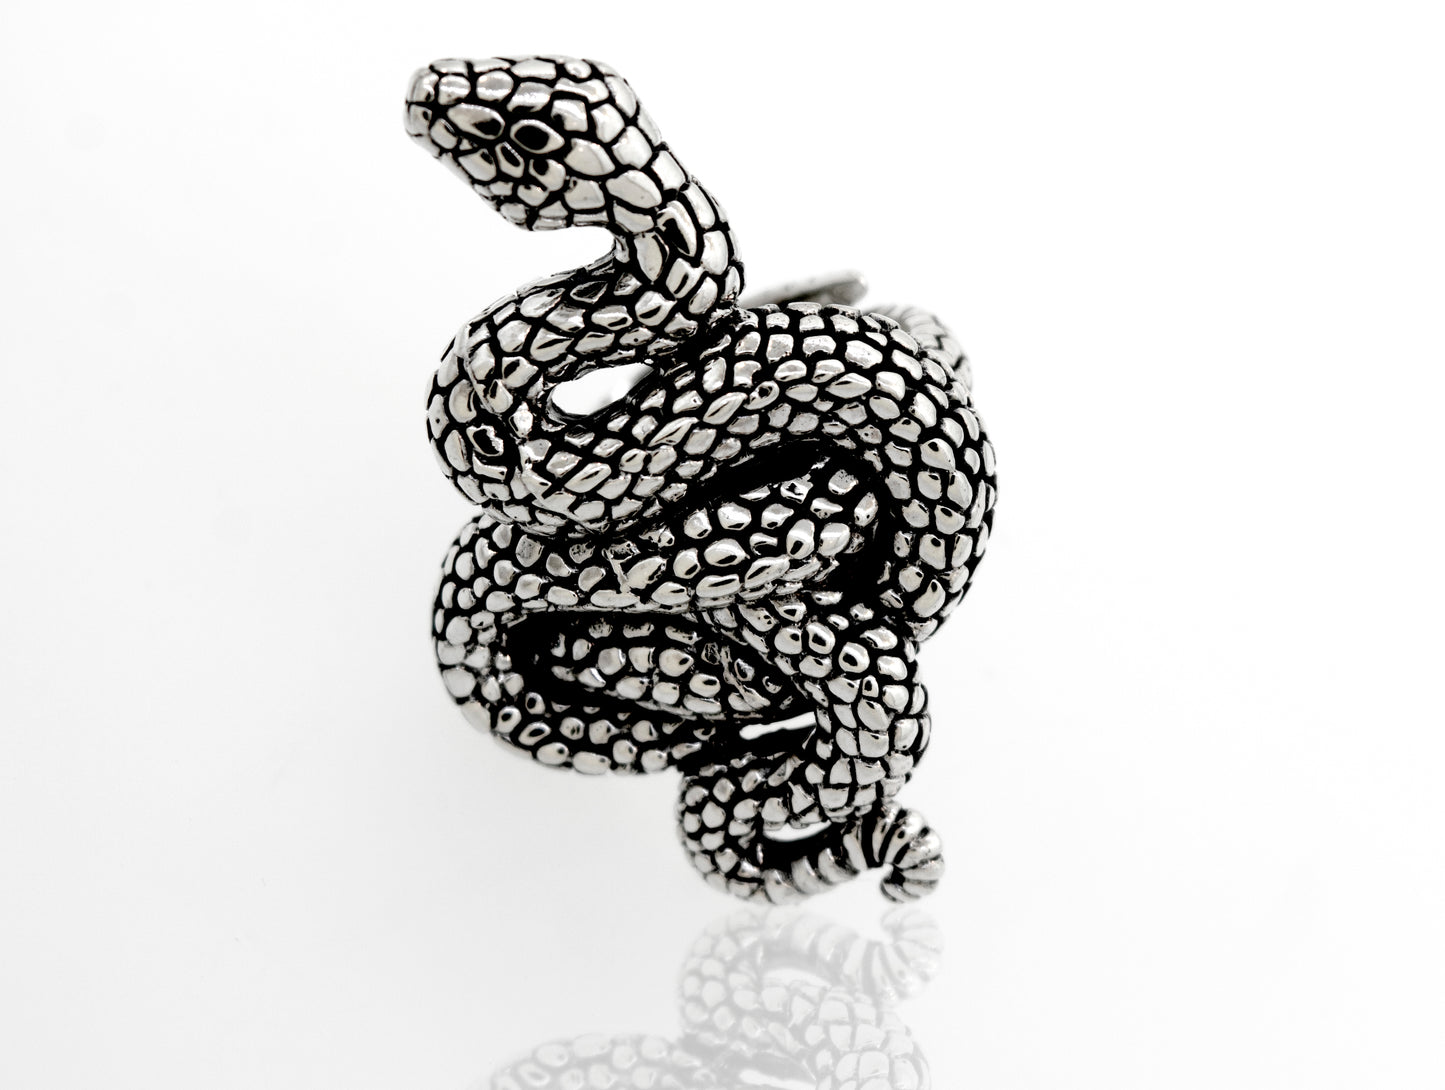 
                  
                    A Coiled Snake Ring by Super Silver, made of .925 Sterling Silver with an adjustable band, resting on a white surface.
                  
                